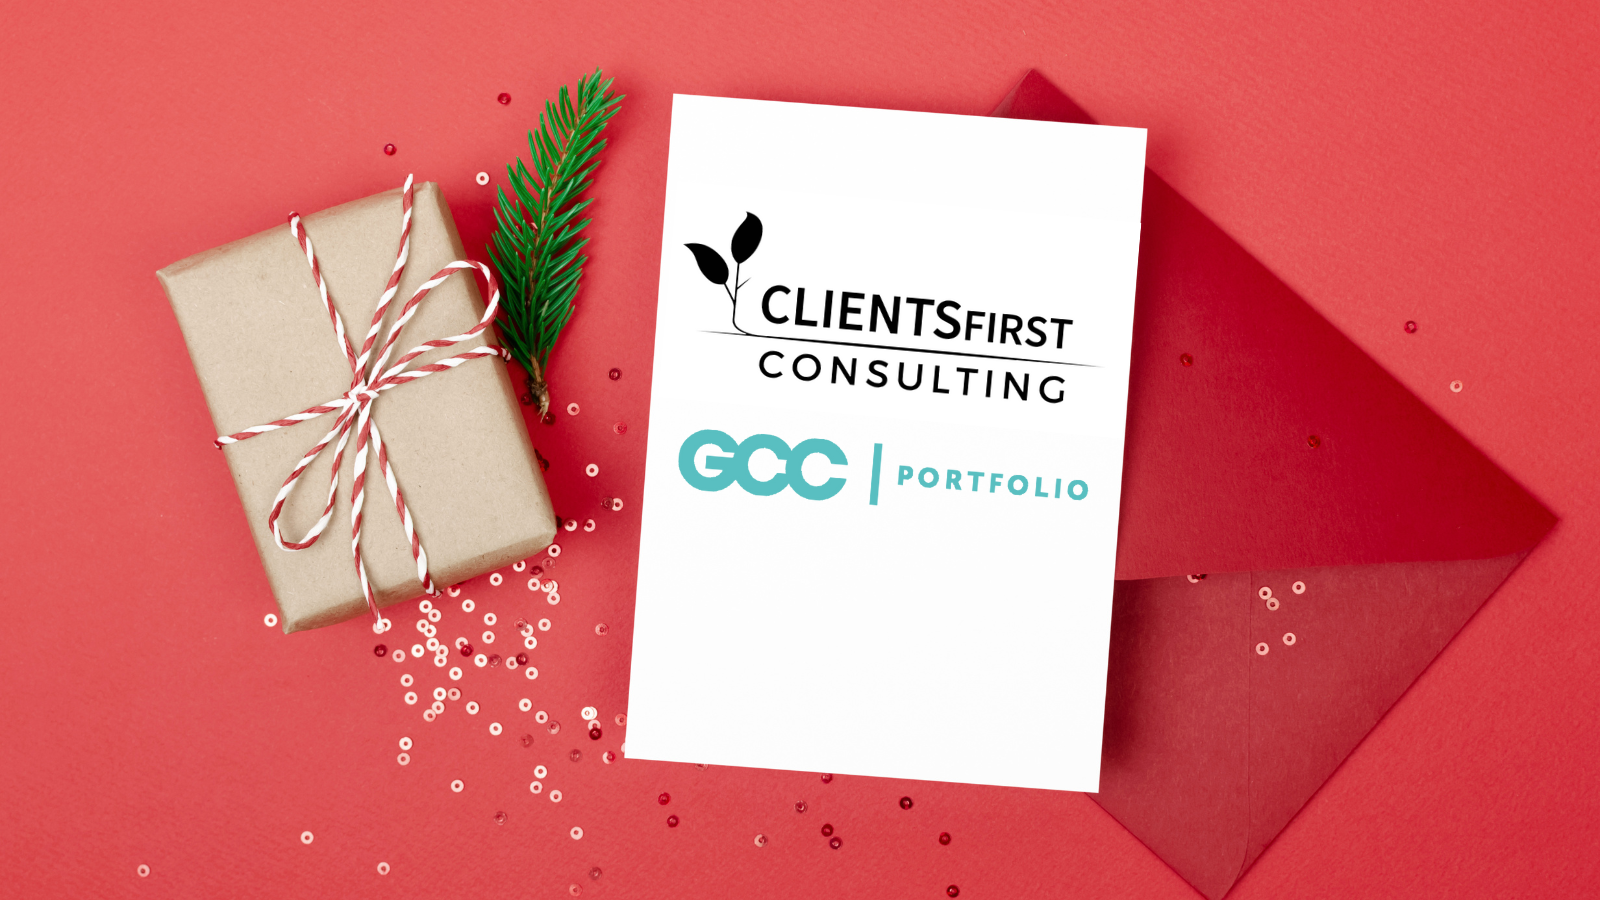 How To Harness The Power Of ECards For Client Outreach This Holiday Season